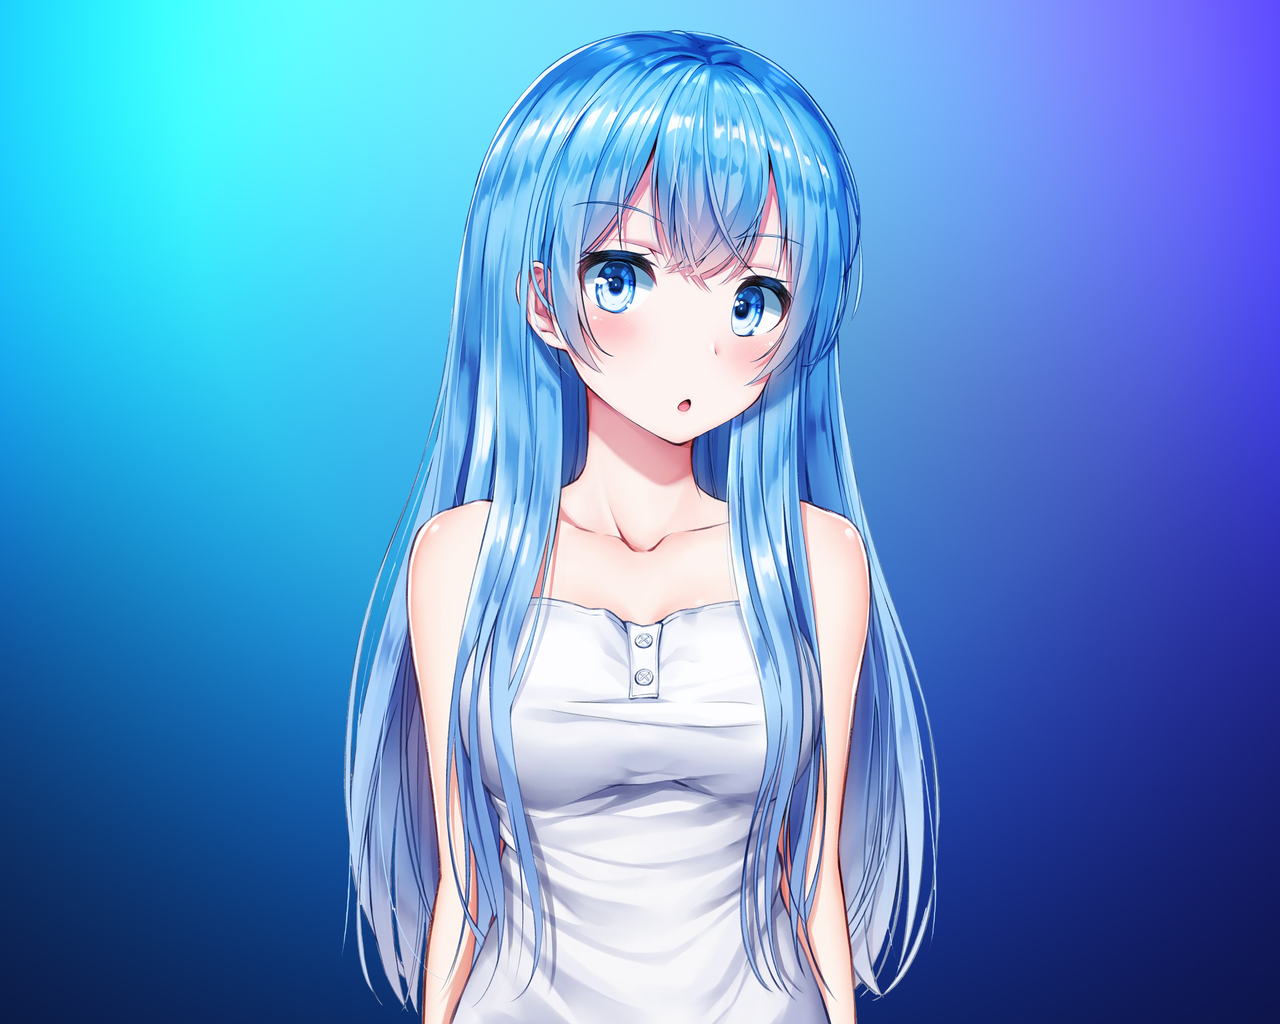 Anime Girl with Blue Colored Hair - wide 3